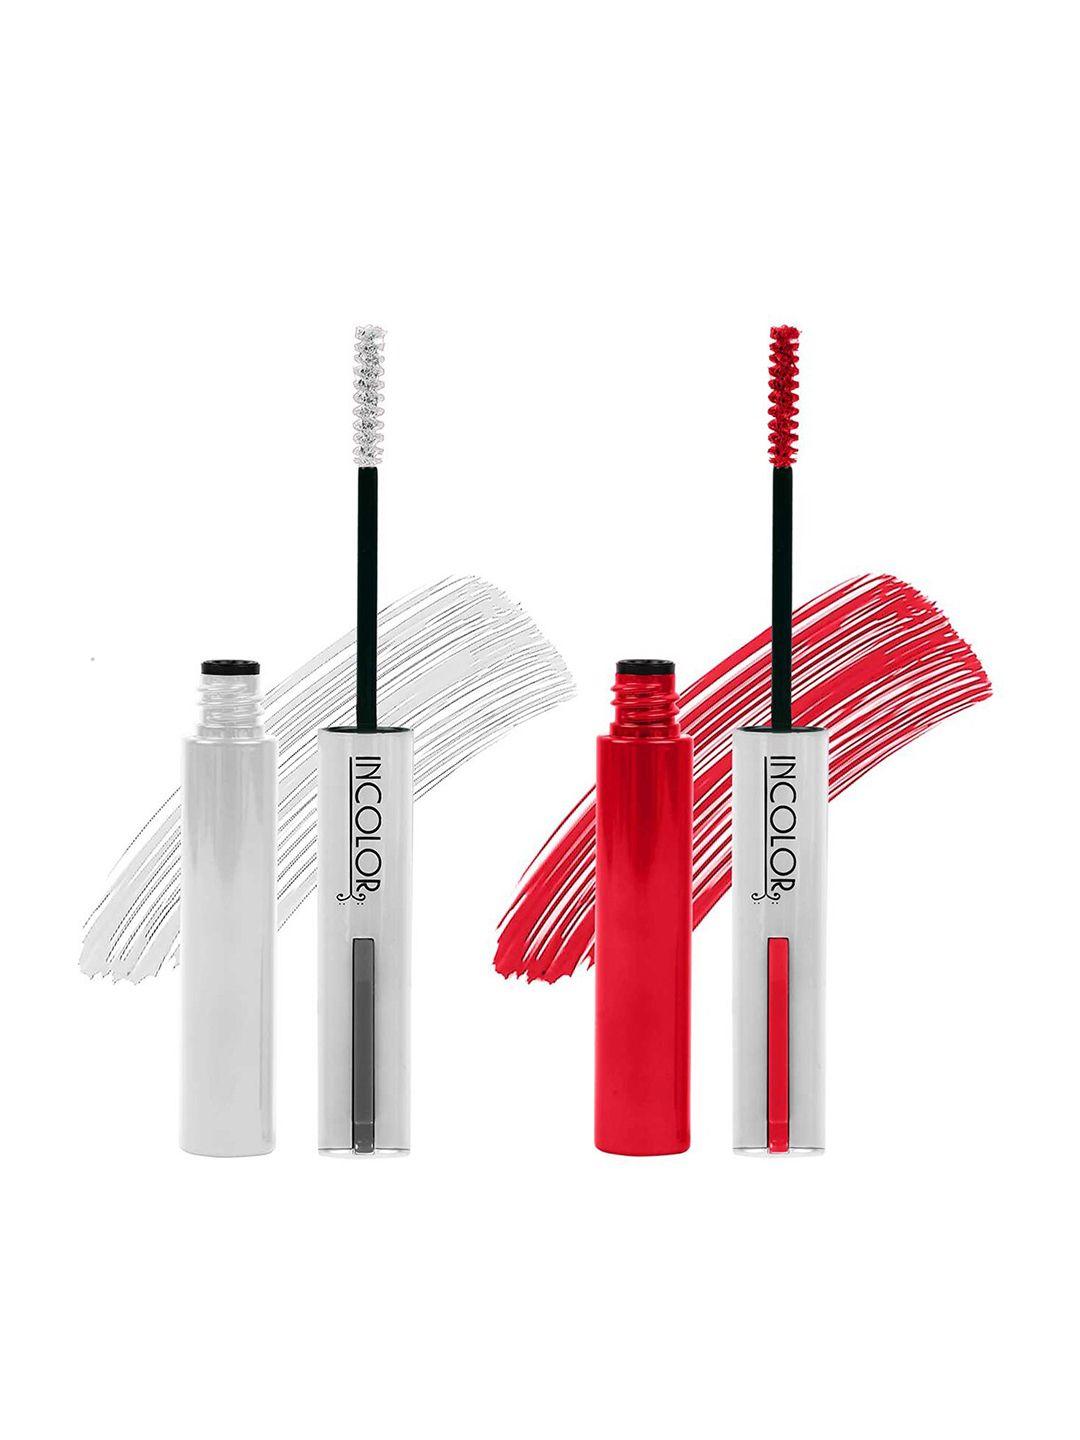 incolor-set-of-2-long-lasting-mascaras-6-ml-each---milky-white-02-&-imperial-red-05